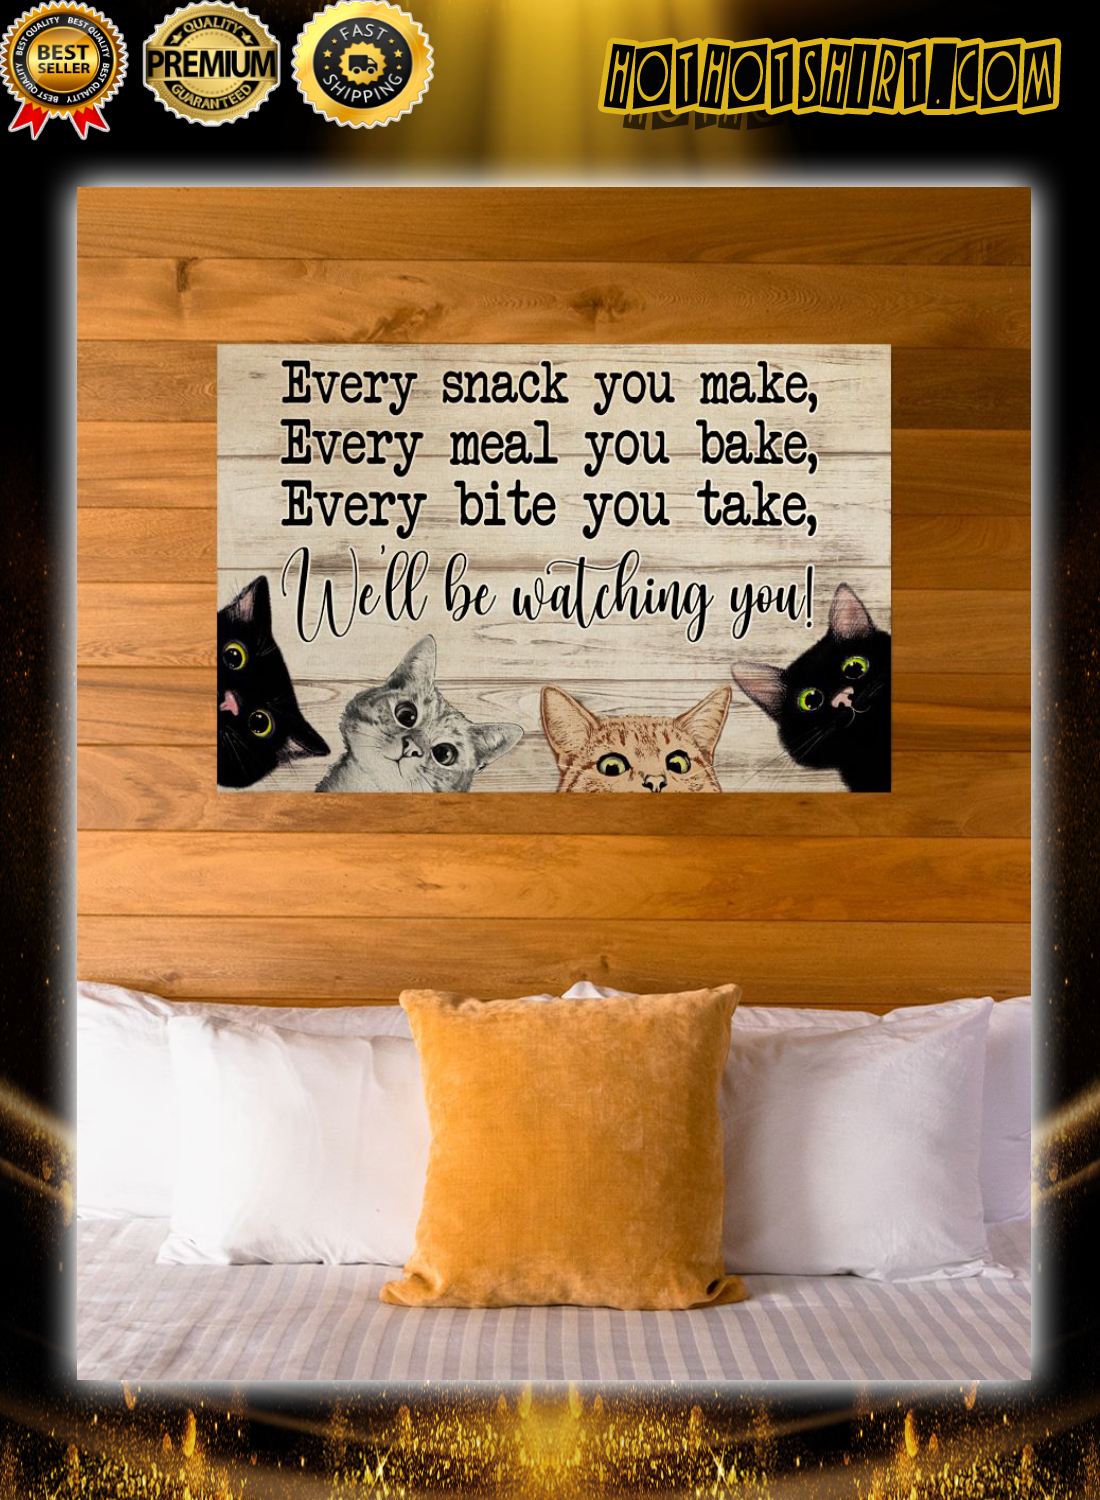 Sneaky cats we'll be watching you poster